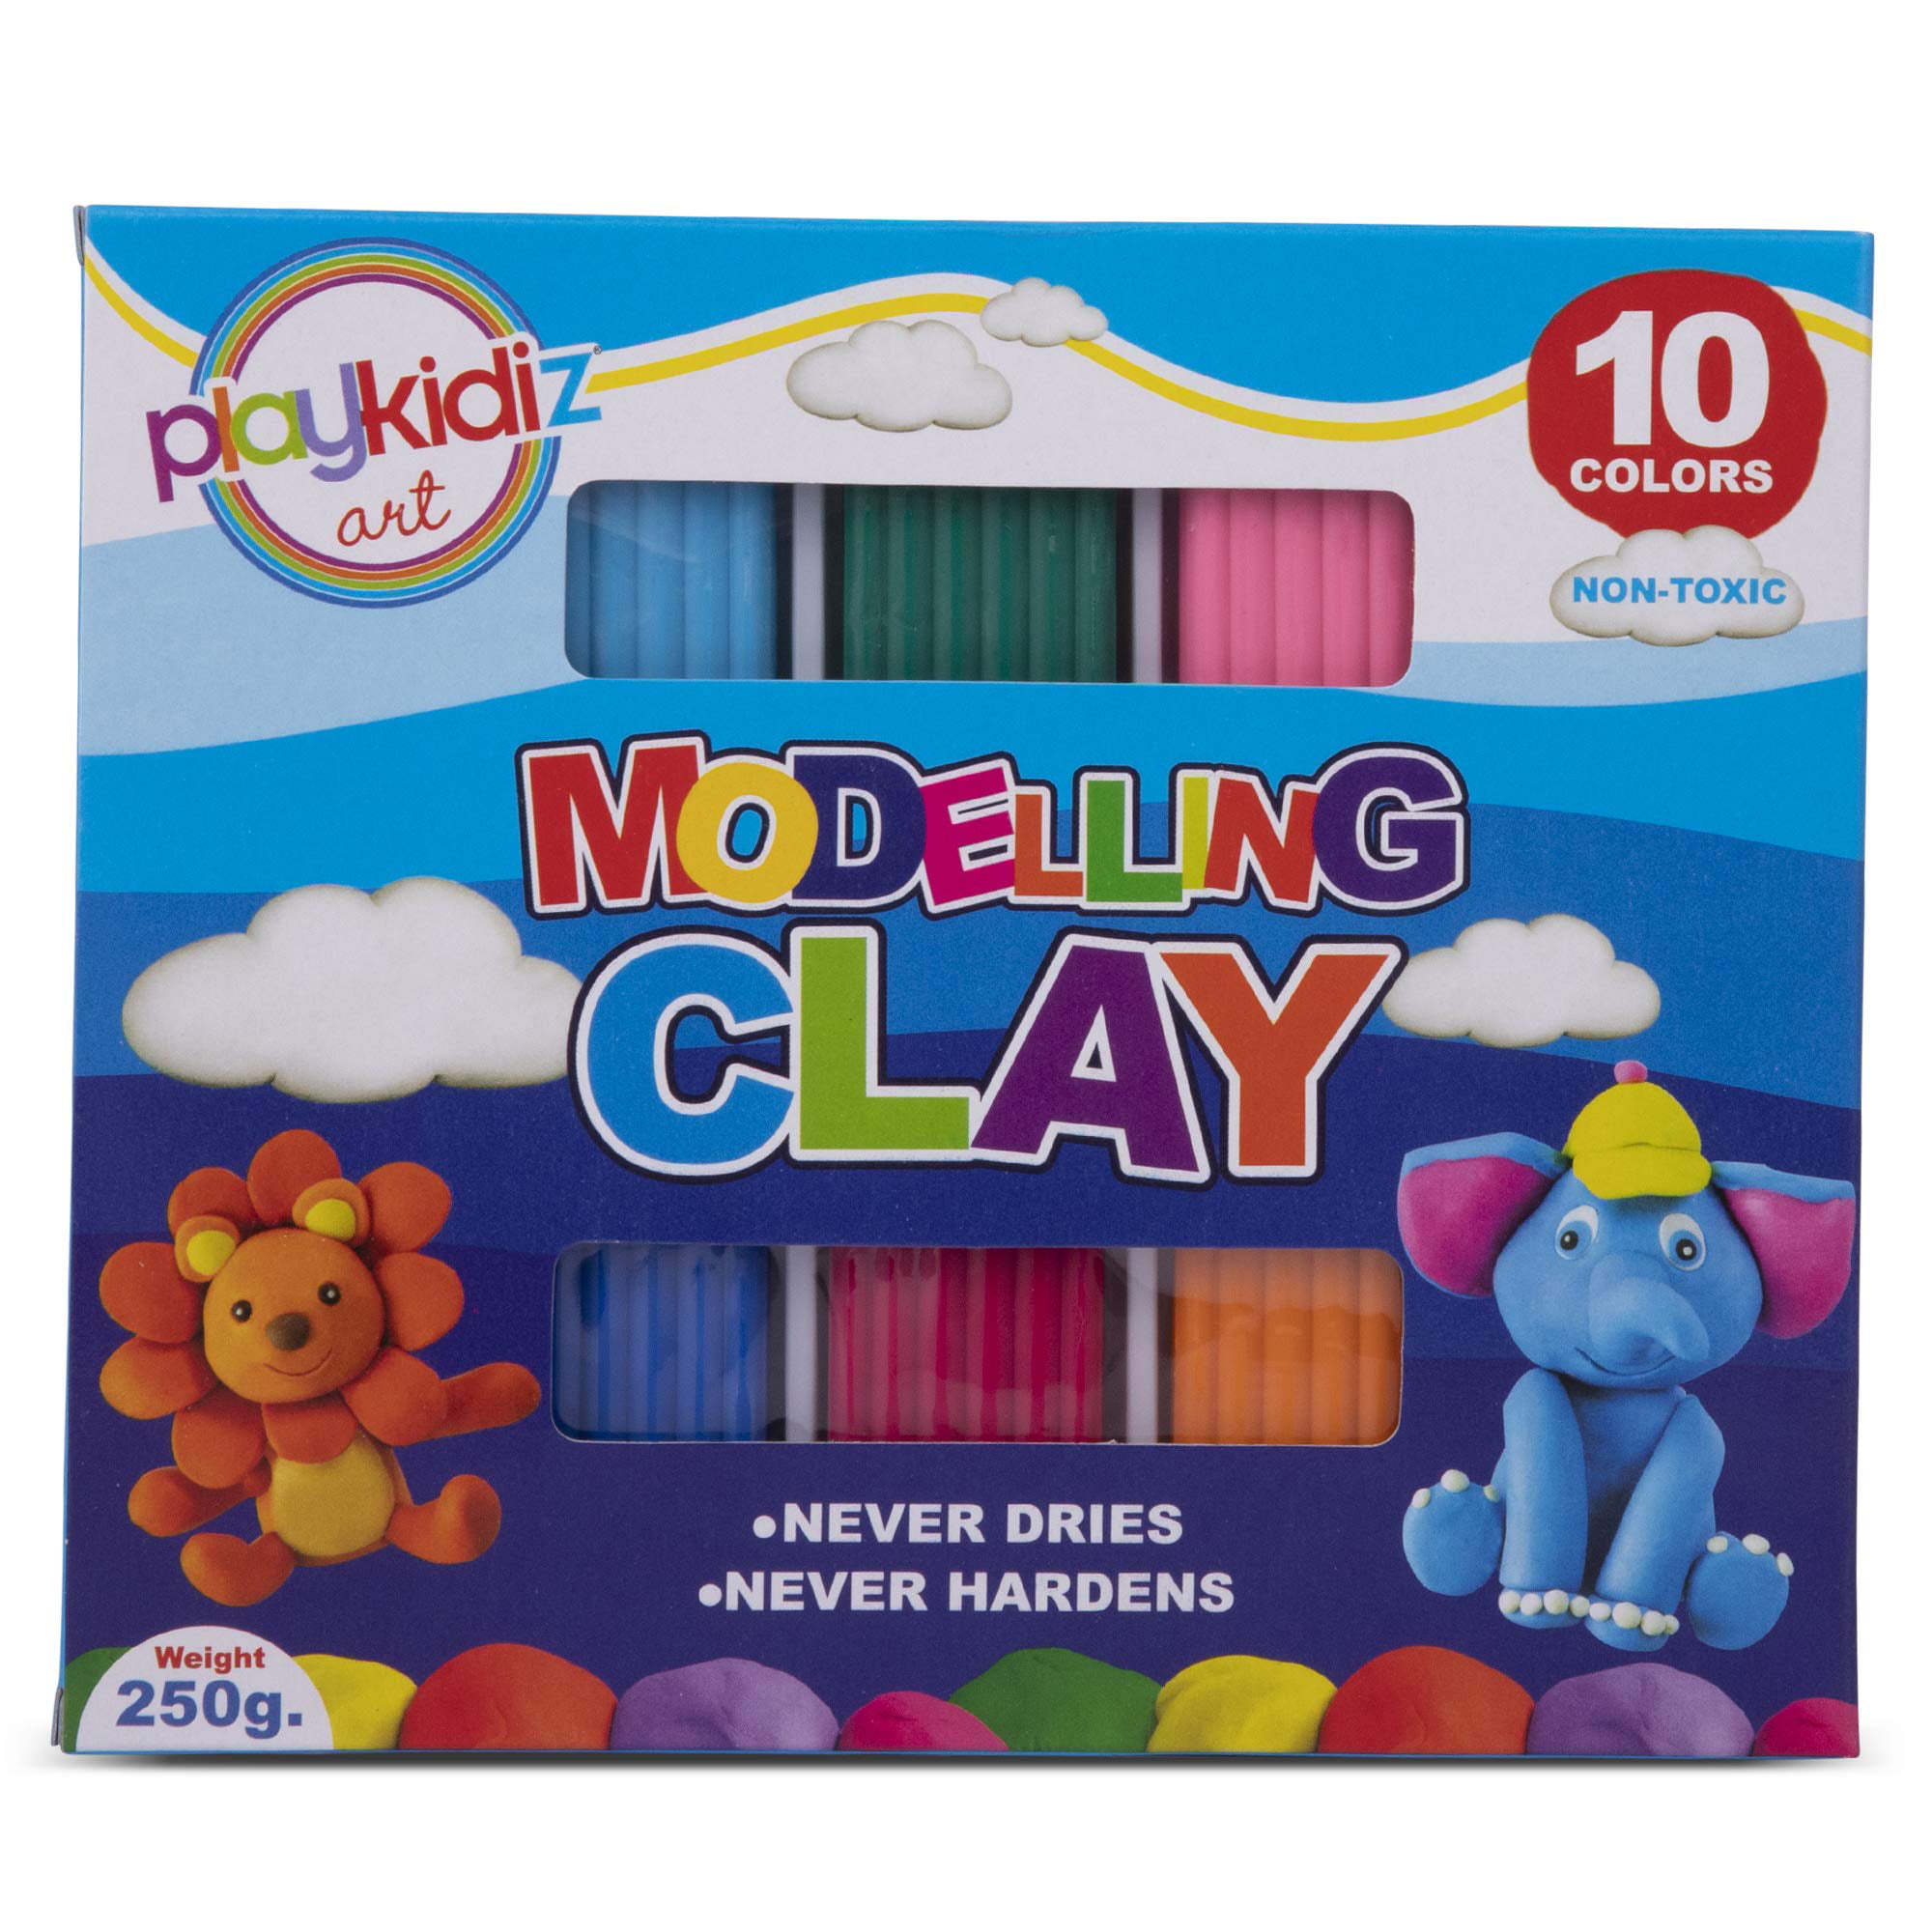 Playkidiz Art Modeling Clay 8 Colors in PVC Clam Shell Box, Beginners Pack  480 Grams, STEM Educational DIY Molding Set, at Home Crafts for Kids - Toys  4 U